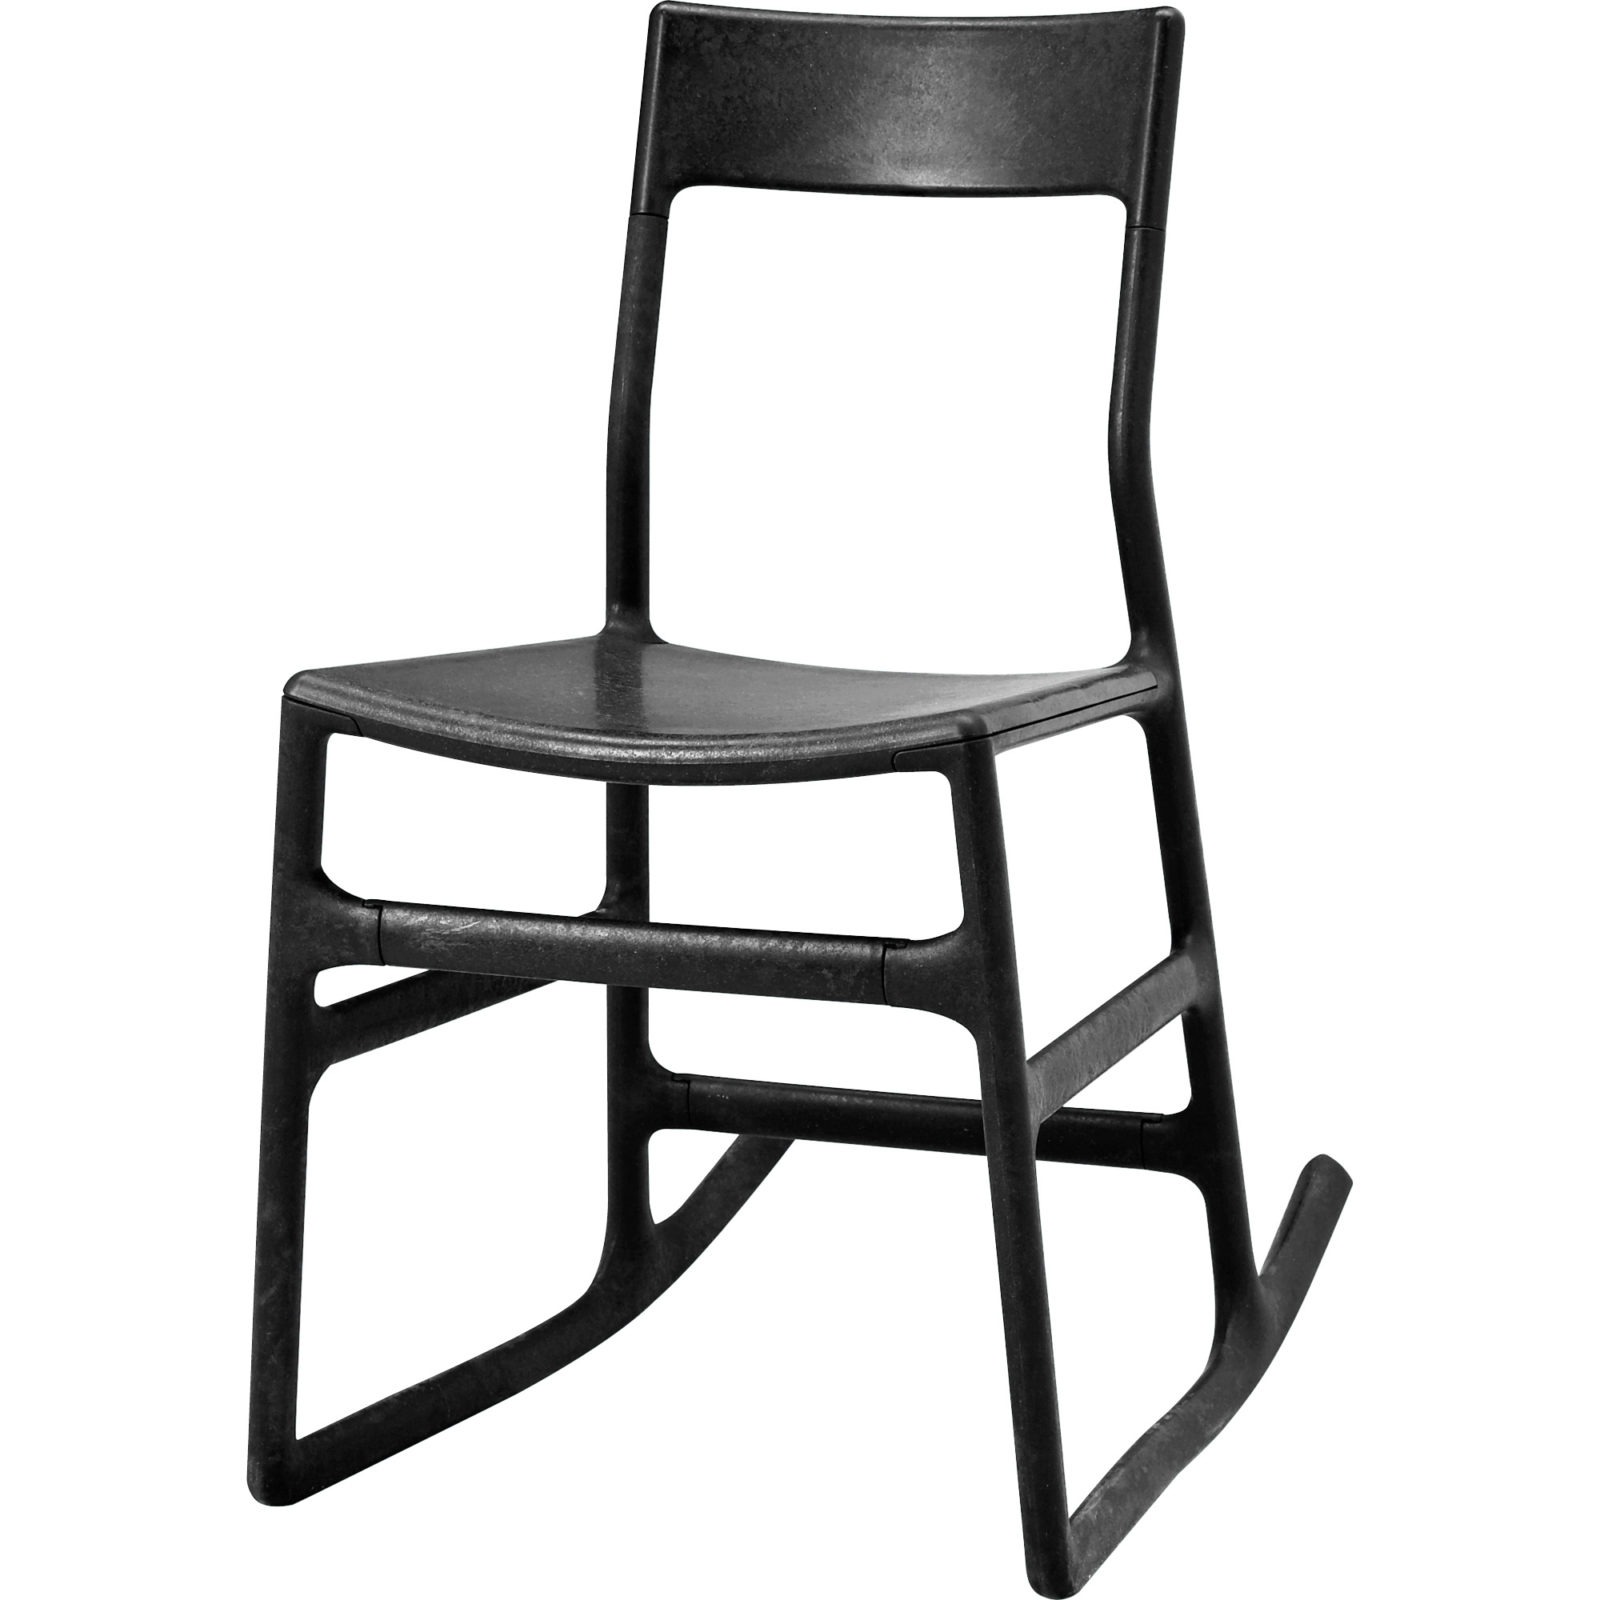 Simple black chair with rocking legs so one can lean back, IKEA PS ELLAN.